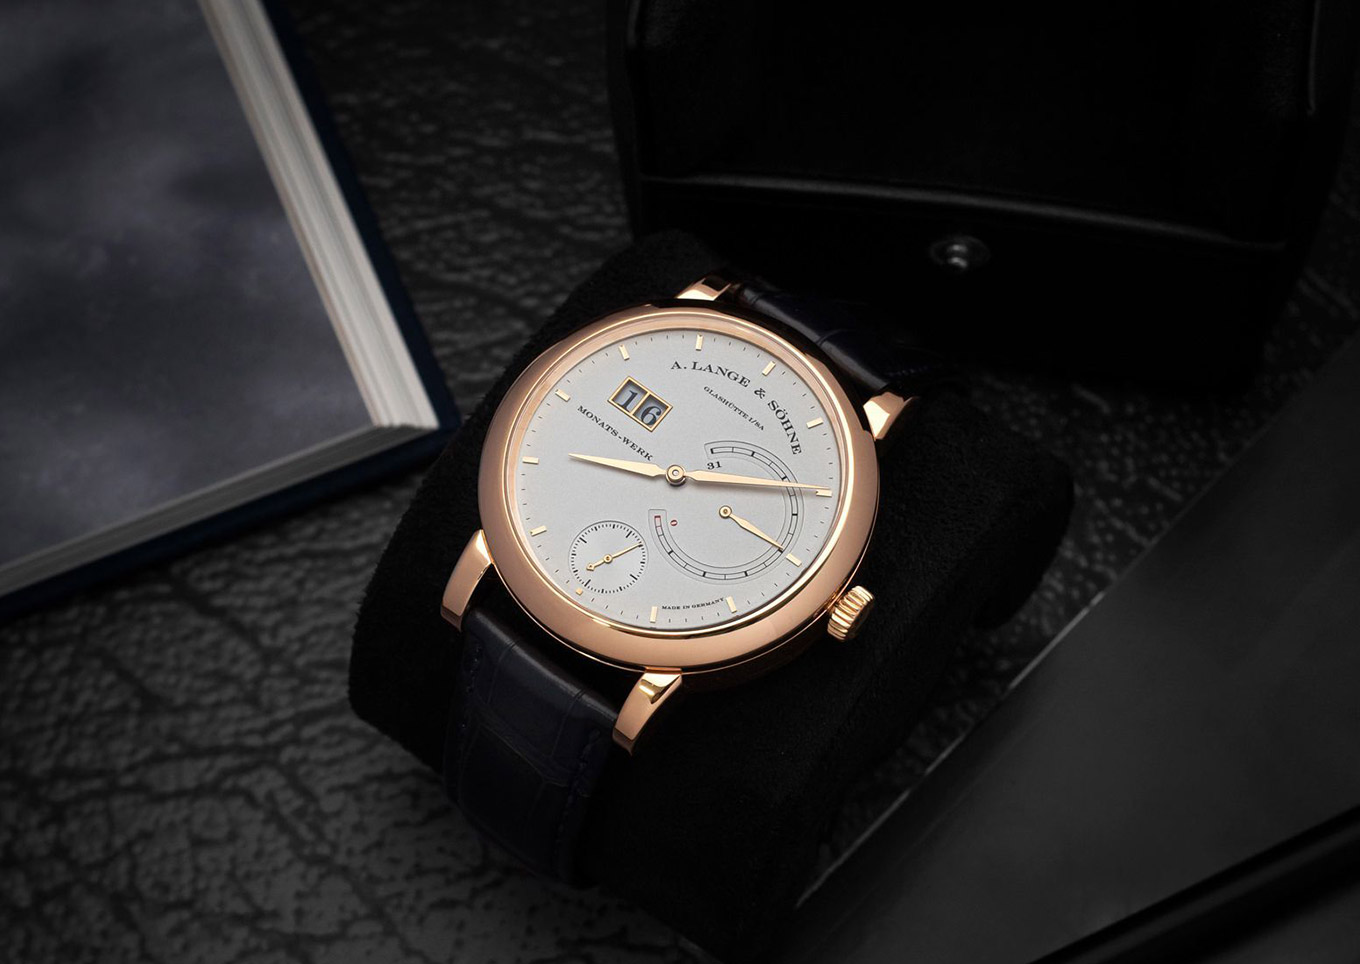 A. Lange & Sohne Lange 31 hand-wound men's watch with a silver dial and 31-days of power reserve